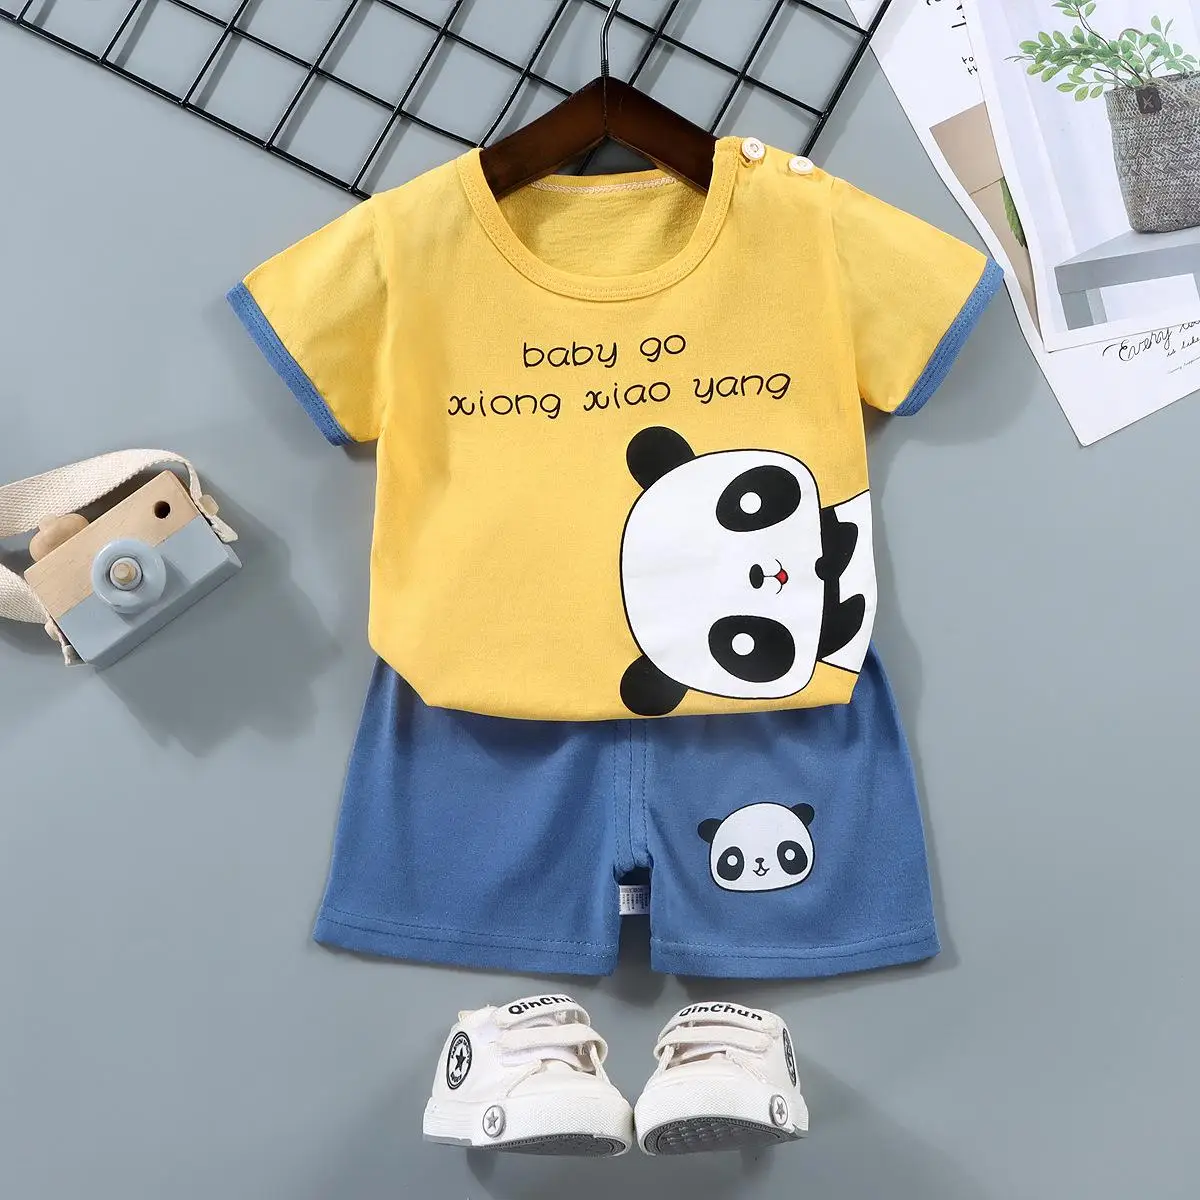 Clothing Sets expensive 2022 Summer  Loose Cartoon Print  O-neck Short  Sleeves +Pants 2pcs Outfits Boys And Girls Cute Casual Pure Cotton Clothes Suits Clothing Sets classic Clothing Sets